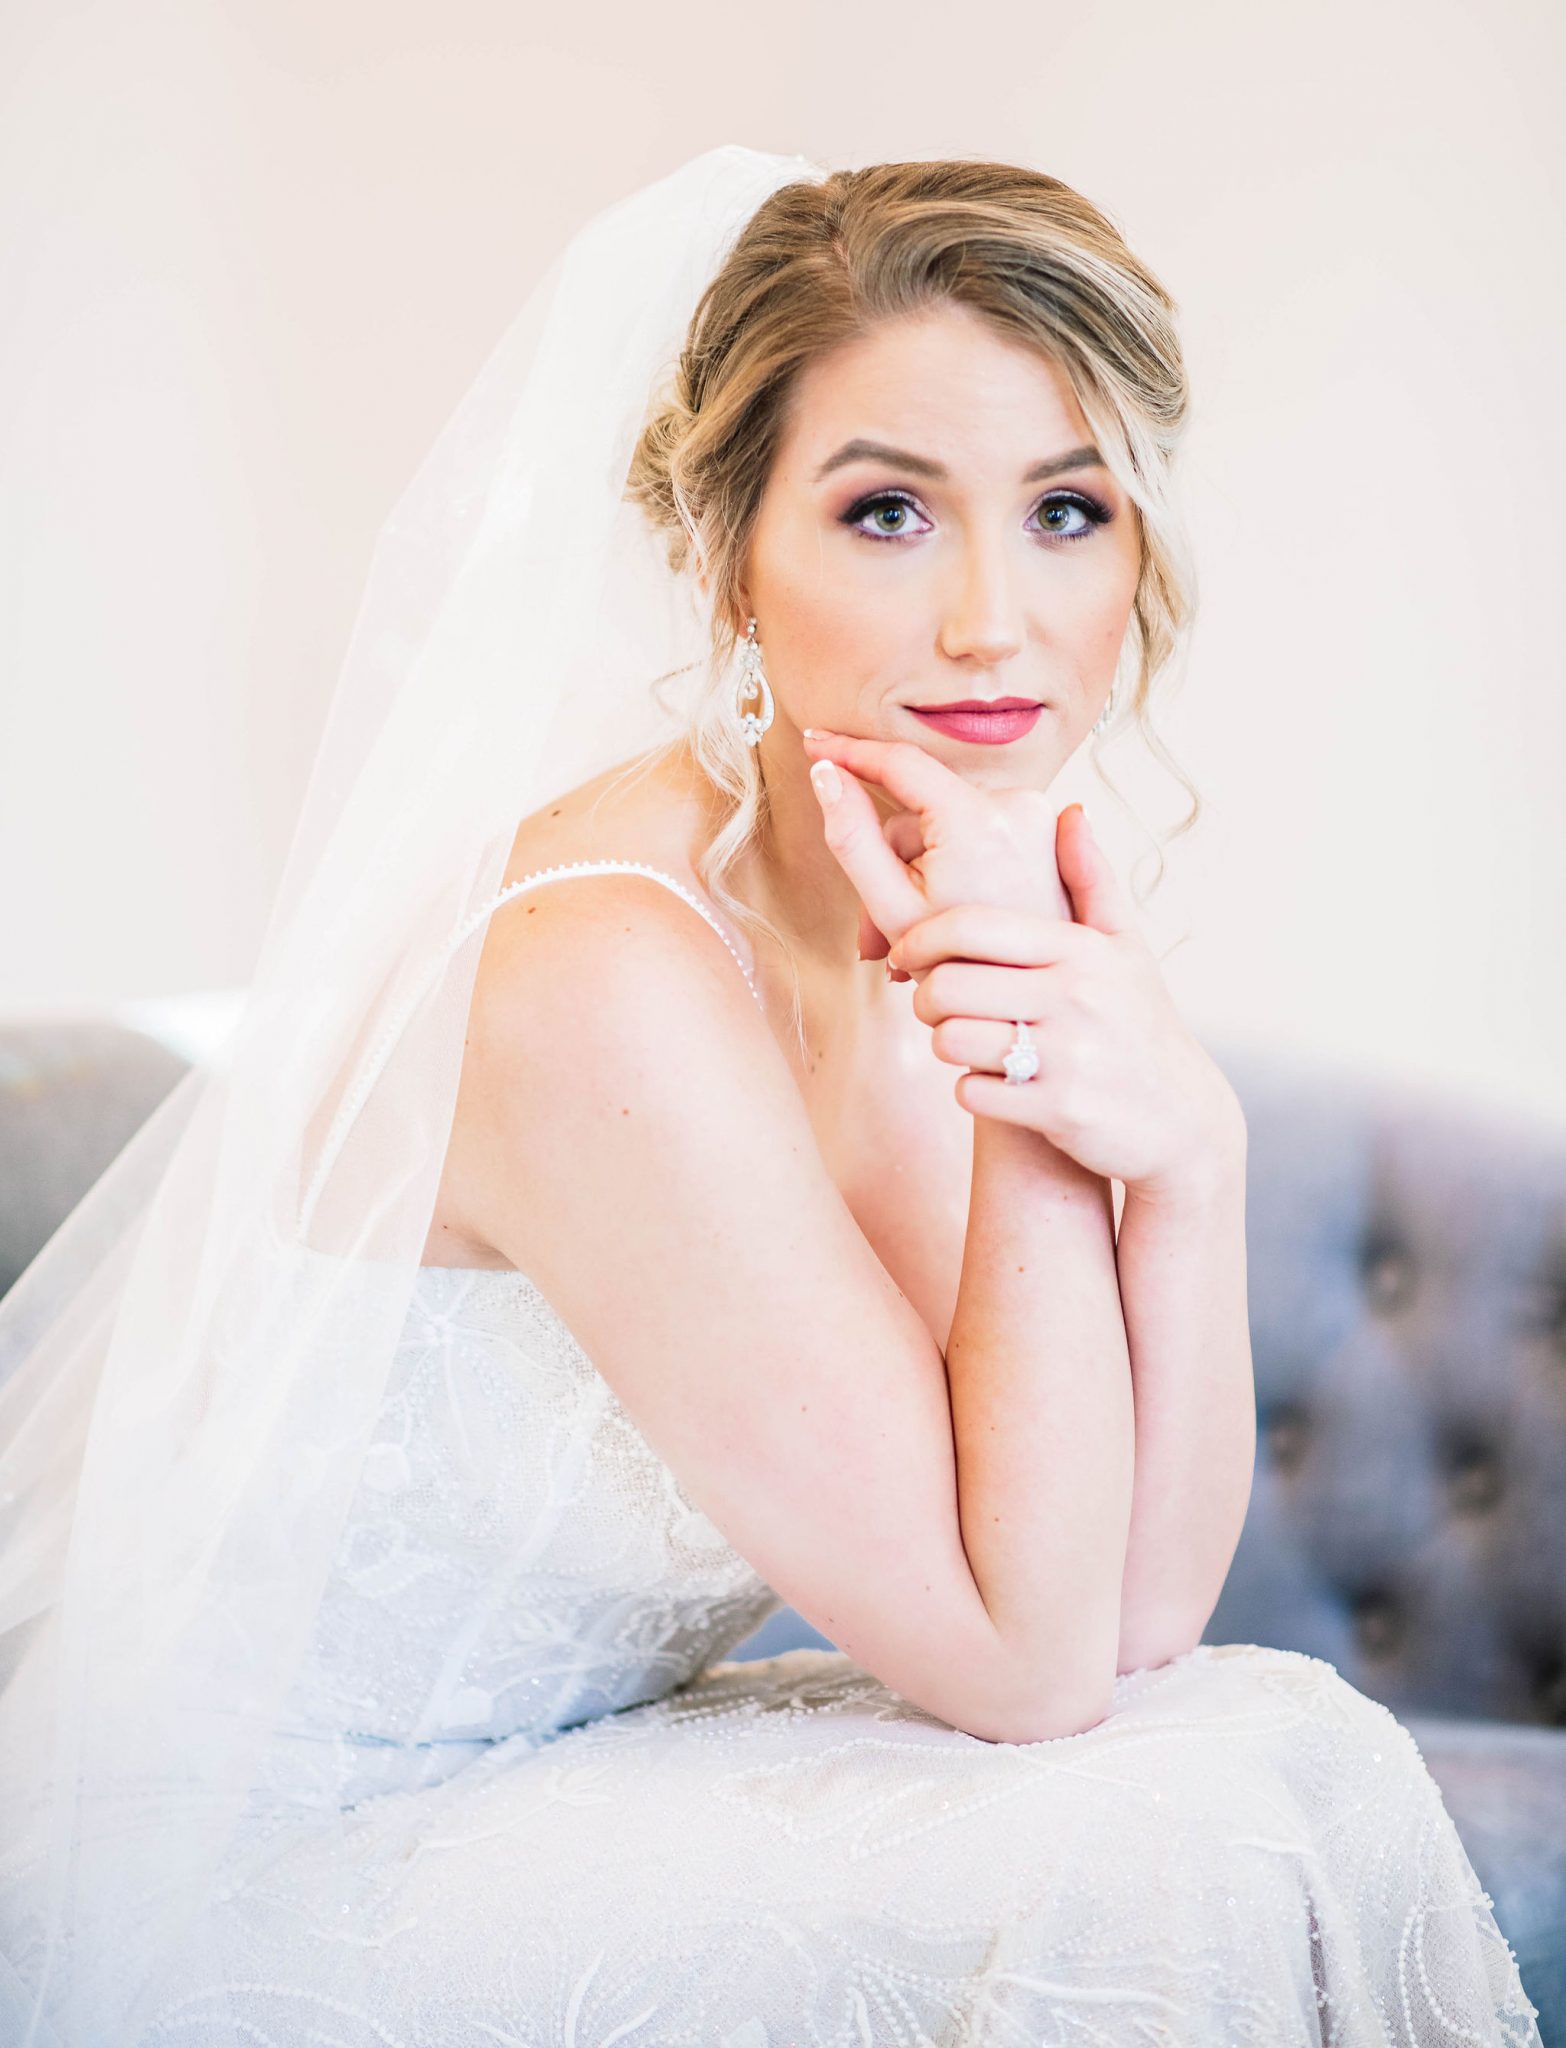 Bride with a romantic updo and veil sits posed for a bridal portrait at the Norland Historic Estate Venue